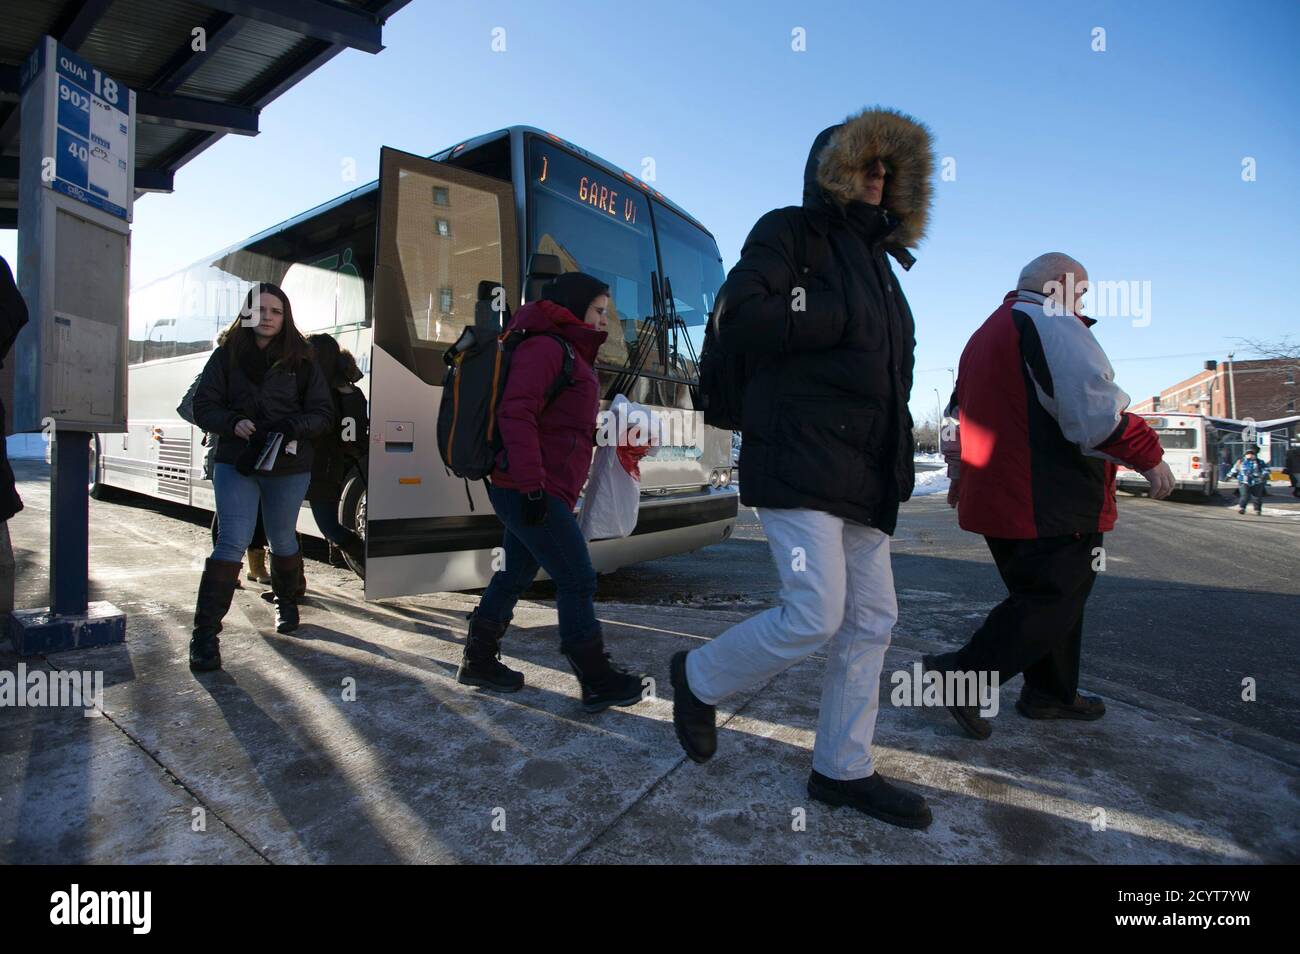 Commuters arrive by special bus from the Vaudreuil-Dorion train station to a metro line at Cote Vertu in Montreal, Quebec, February 16, 2015.  A CP Rail strike left thousands of commuters from three major AMT commuter lines looking for alternate ways to get to work in downtown Montreal.  Canadian Pacific Railway Ltd began operating a reduced freight schedule run by its managers on Sunday, after talks on a new contract broke down and more than 3,000 train engineers and conductors walked off the job. Canada's No. 2 railway and the Teamsters Canada Rail Conference failed to agree on terms includi Stock Photo